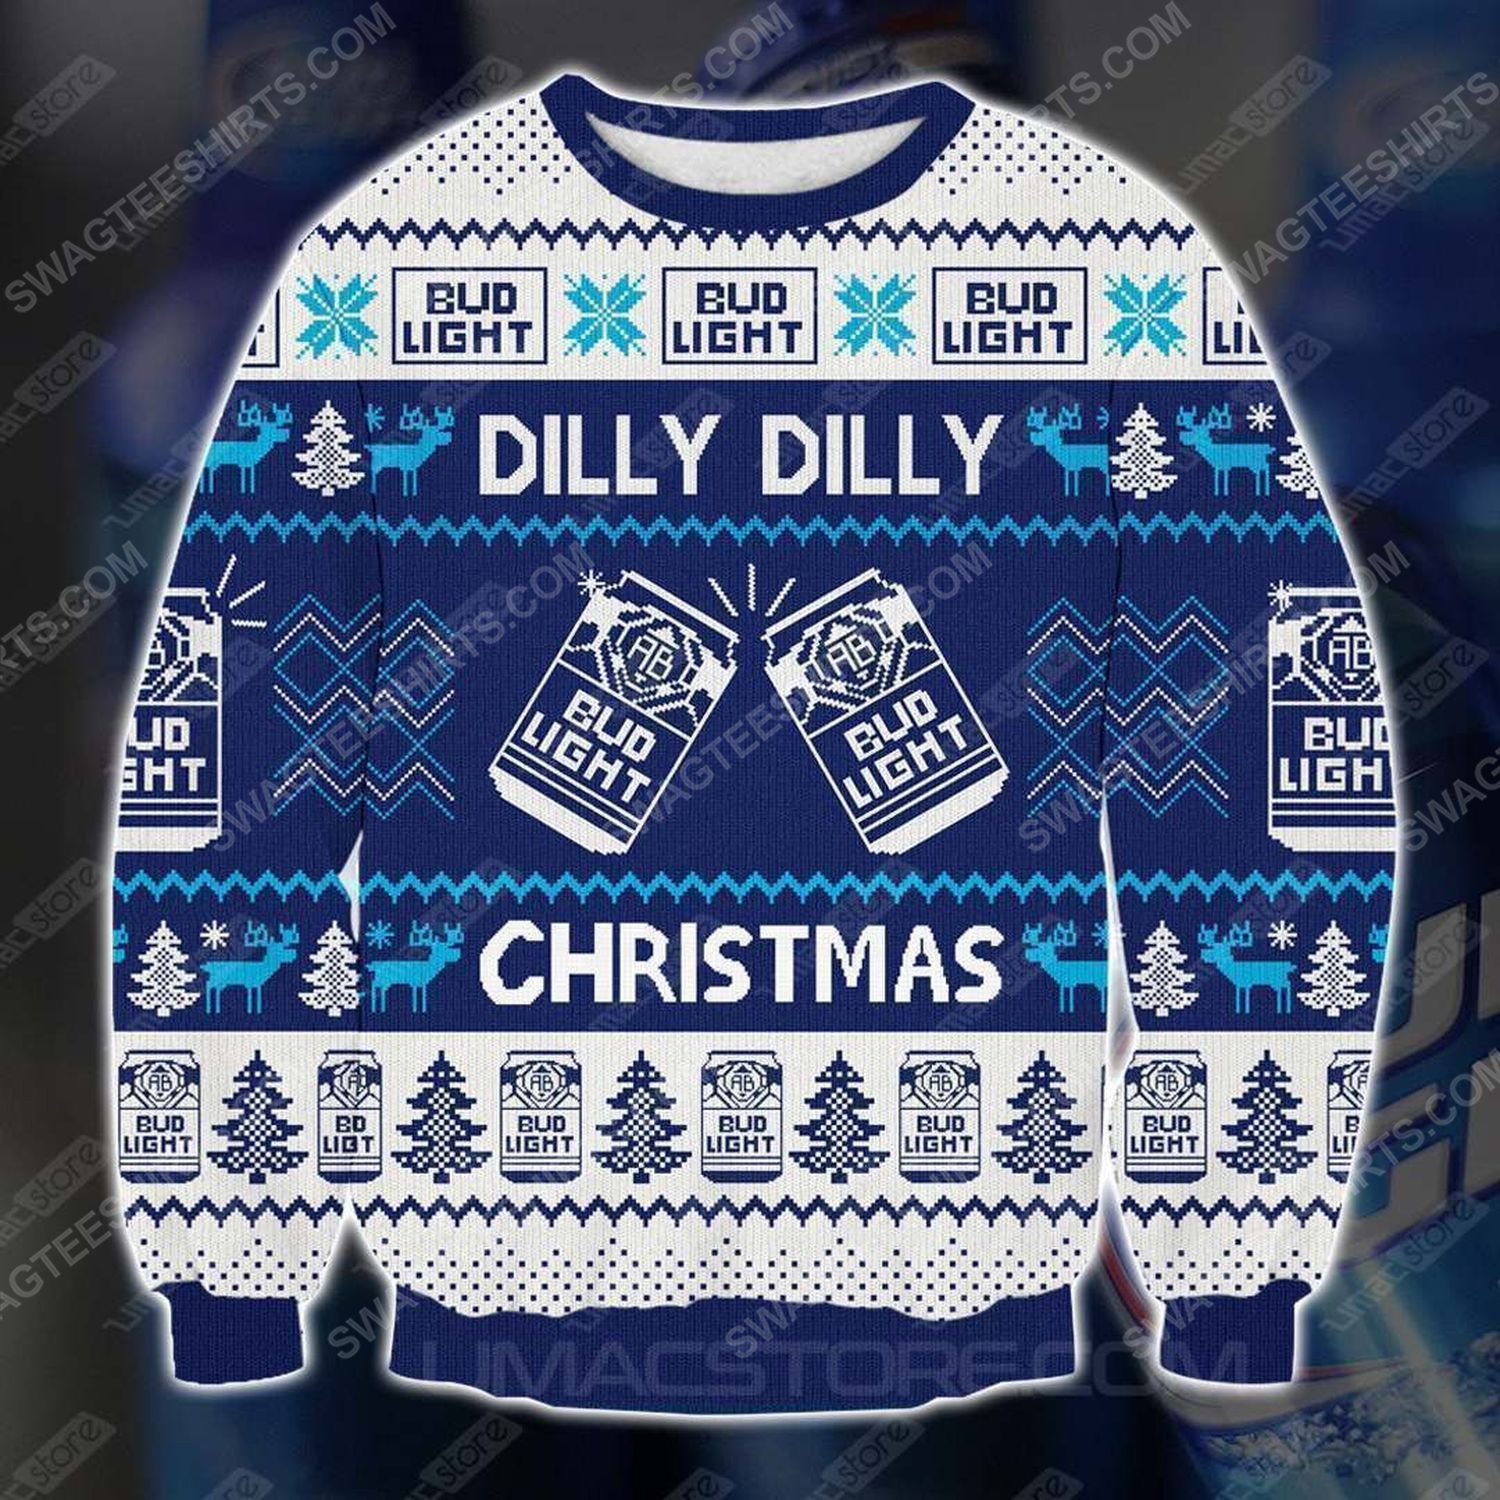 [special edition] Bud light dilly dilly christmas ugly christmas sweater – maria